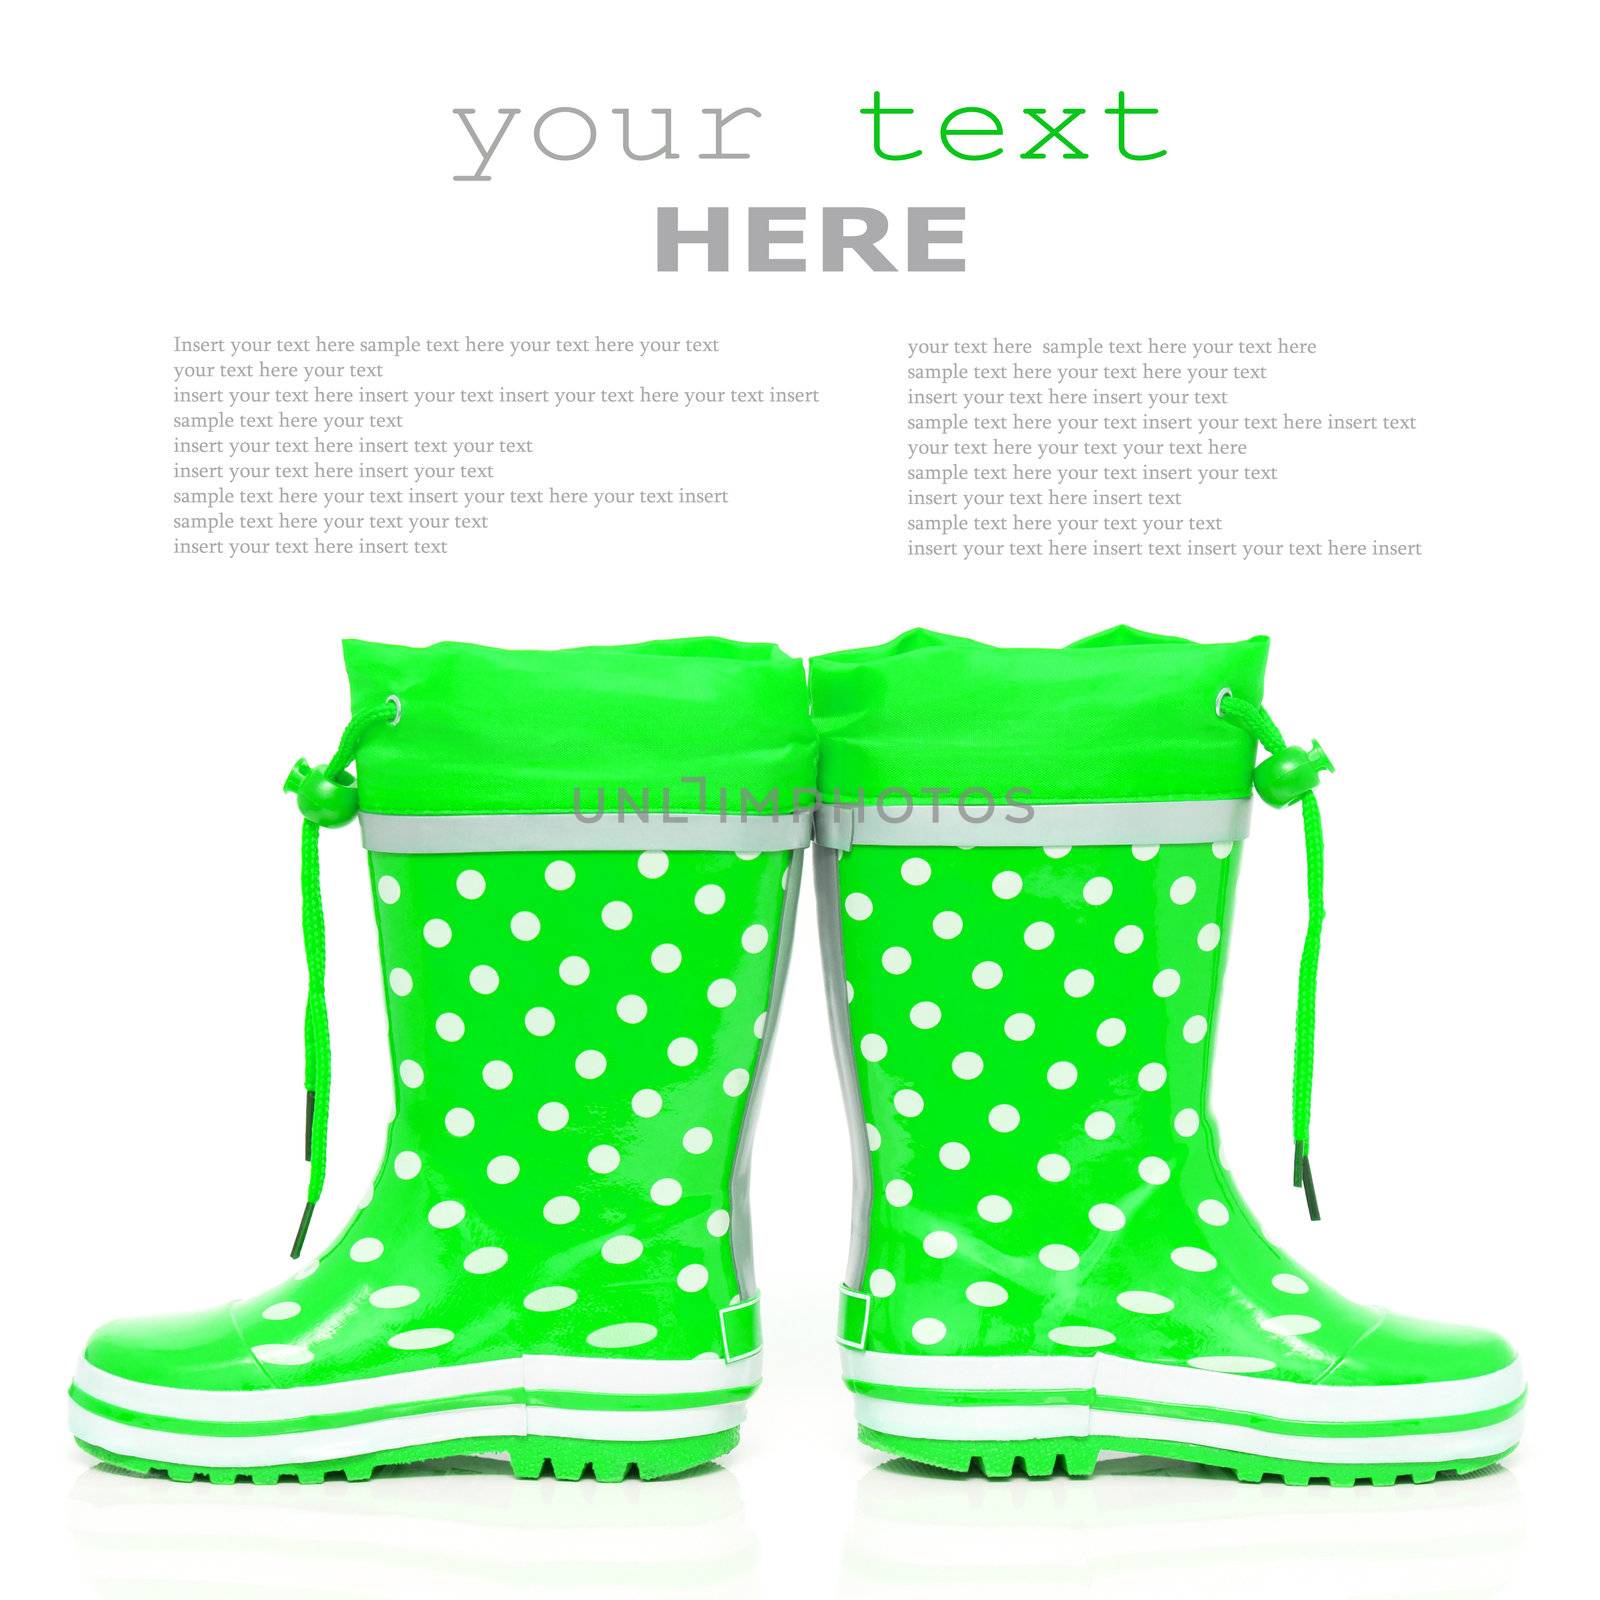 Green rubber boots  by Olinkau